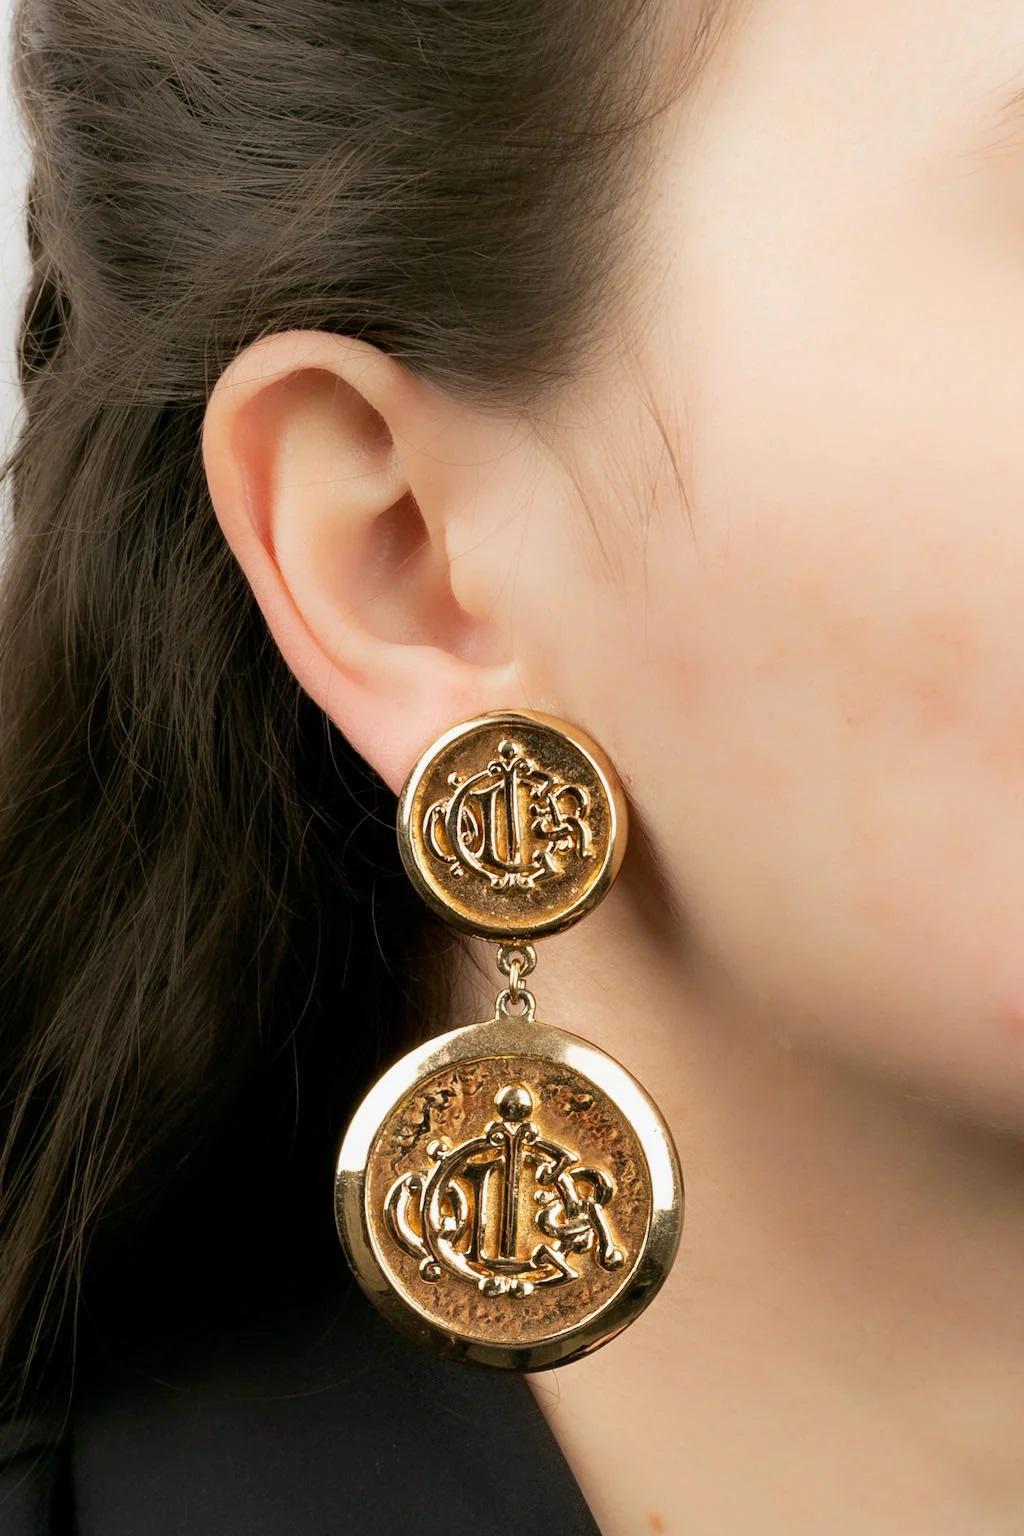 Dior - (Made in Germany) Gold metal clip earrings.

Additional information:
Dimensions: 4 W x 7 H cm

Condition: 
Very good condition

Seller Ref number: BO5